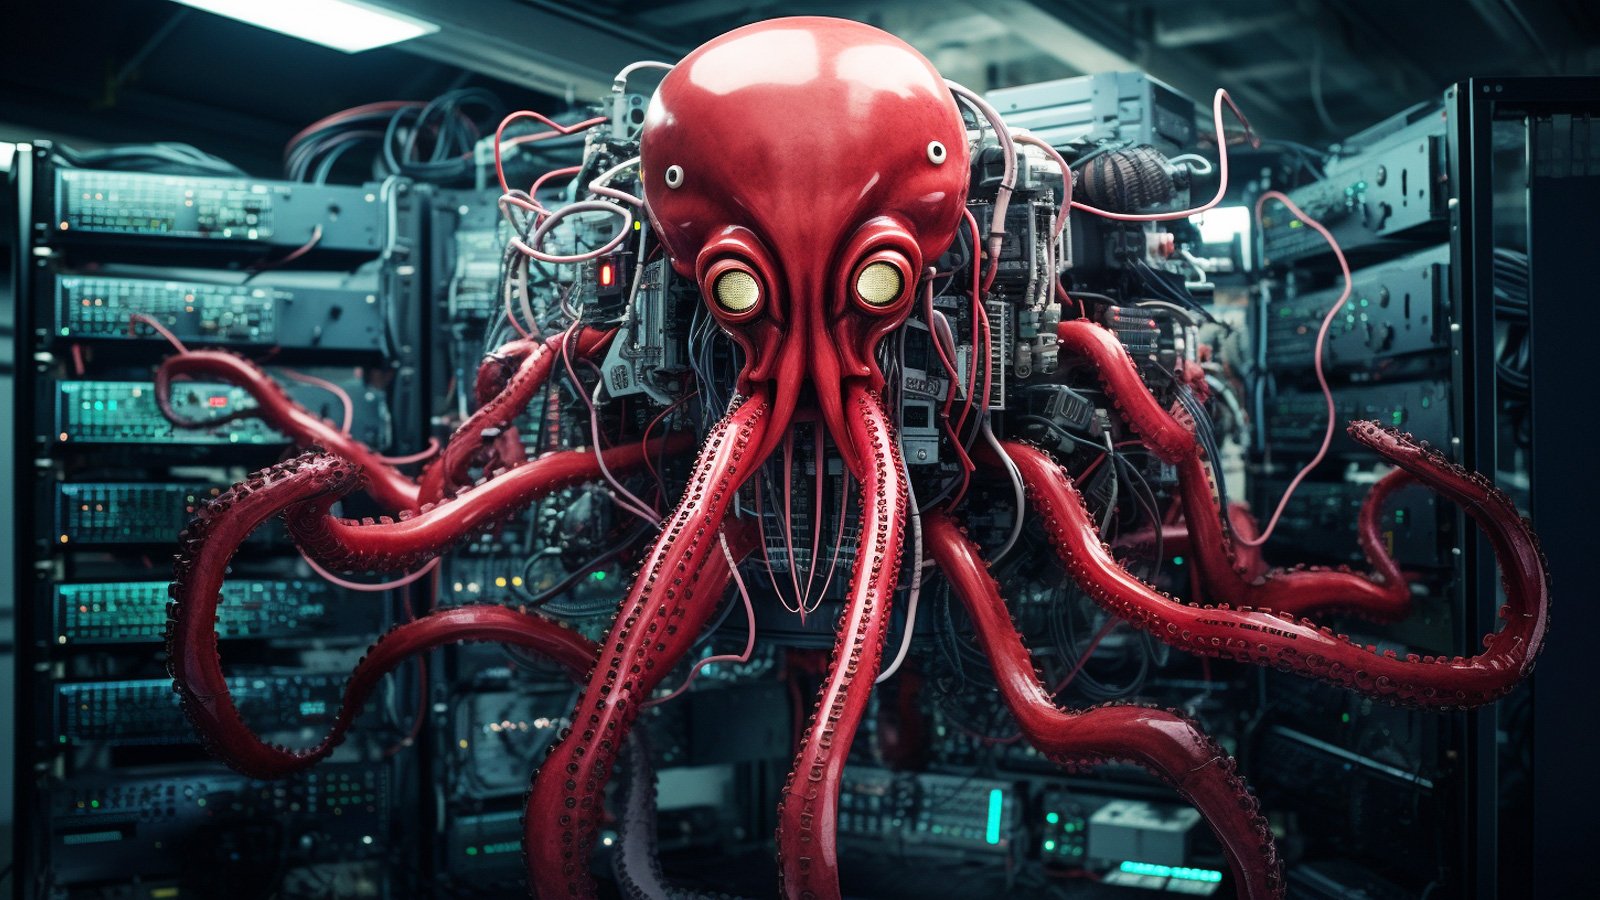 Octo Tempest hackers use advanced social engineering and violent threats to extort orgs